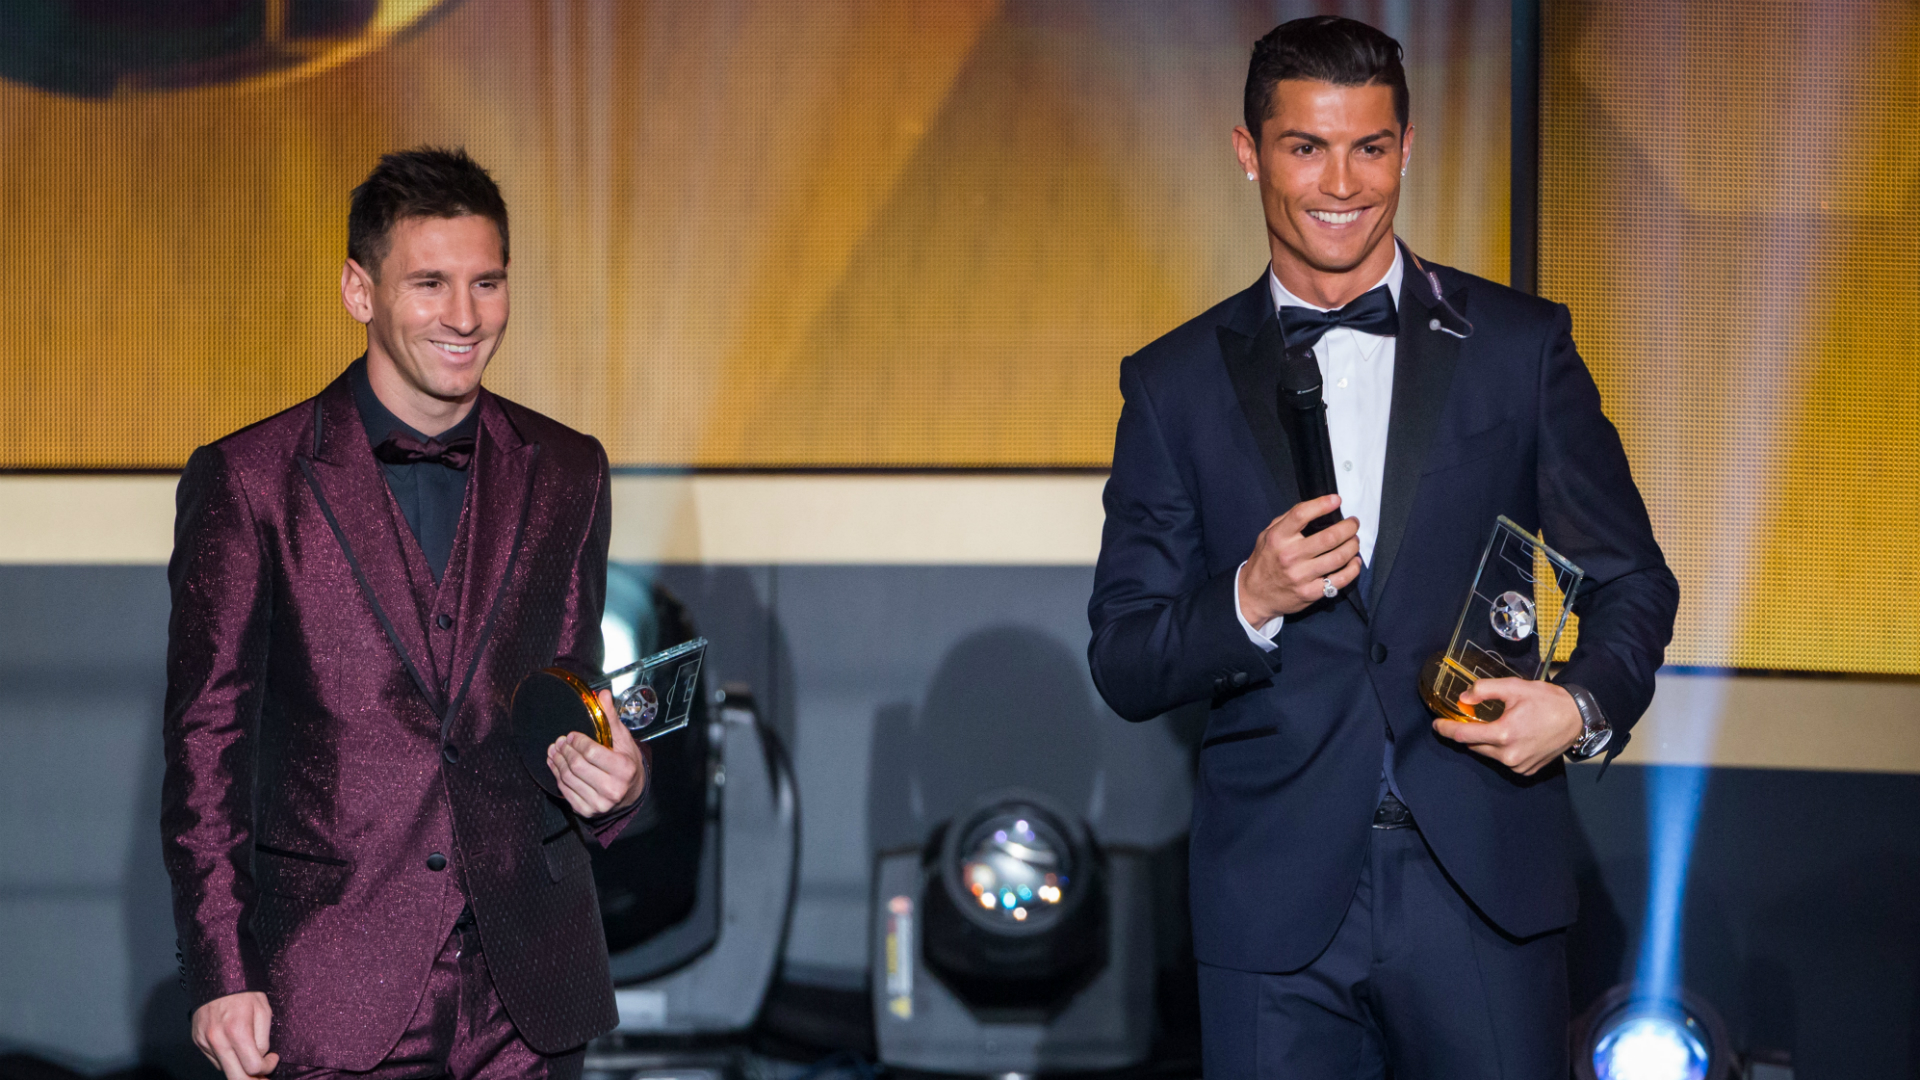 Cristiano Ronaldo denies Lionel Messi rivalry: 'We're not friends, but we  respect each other' - Barca Blaugranes